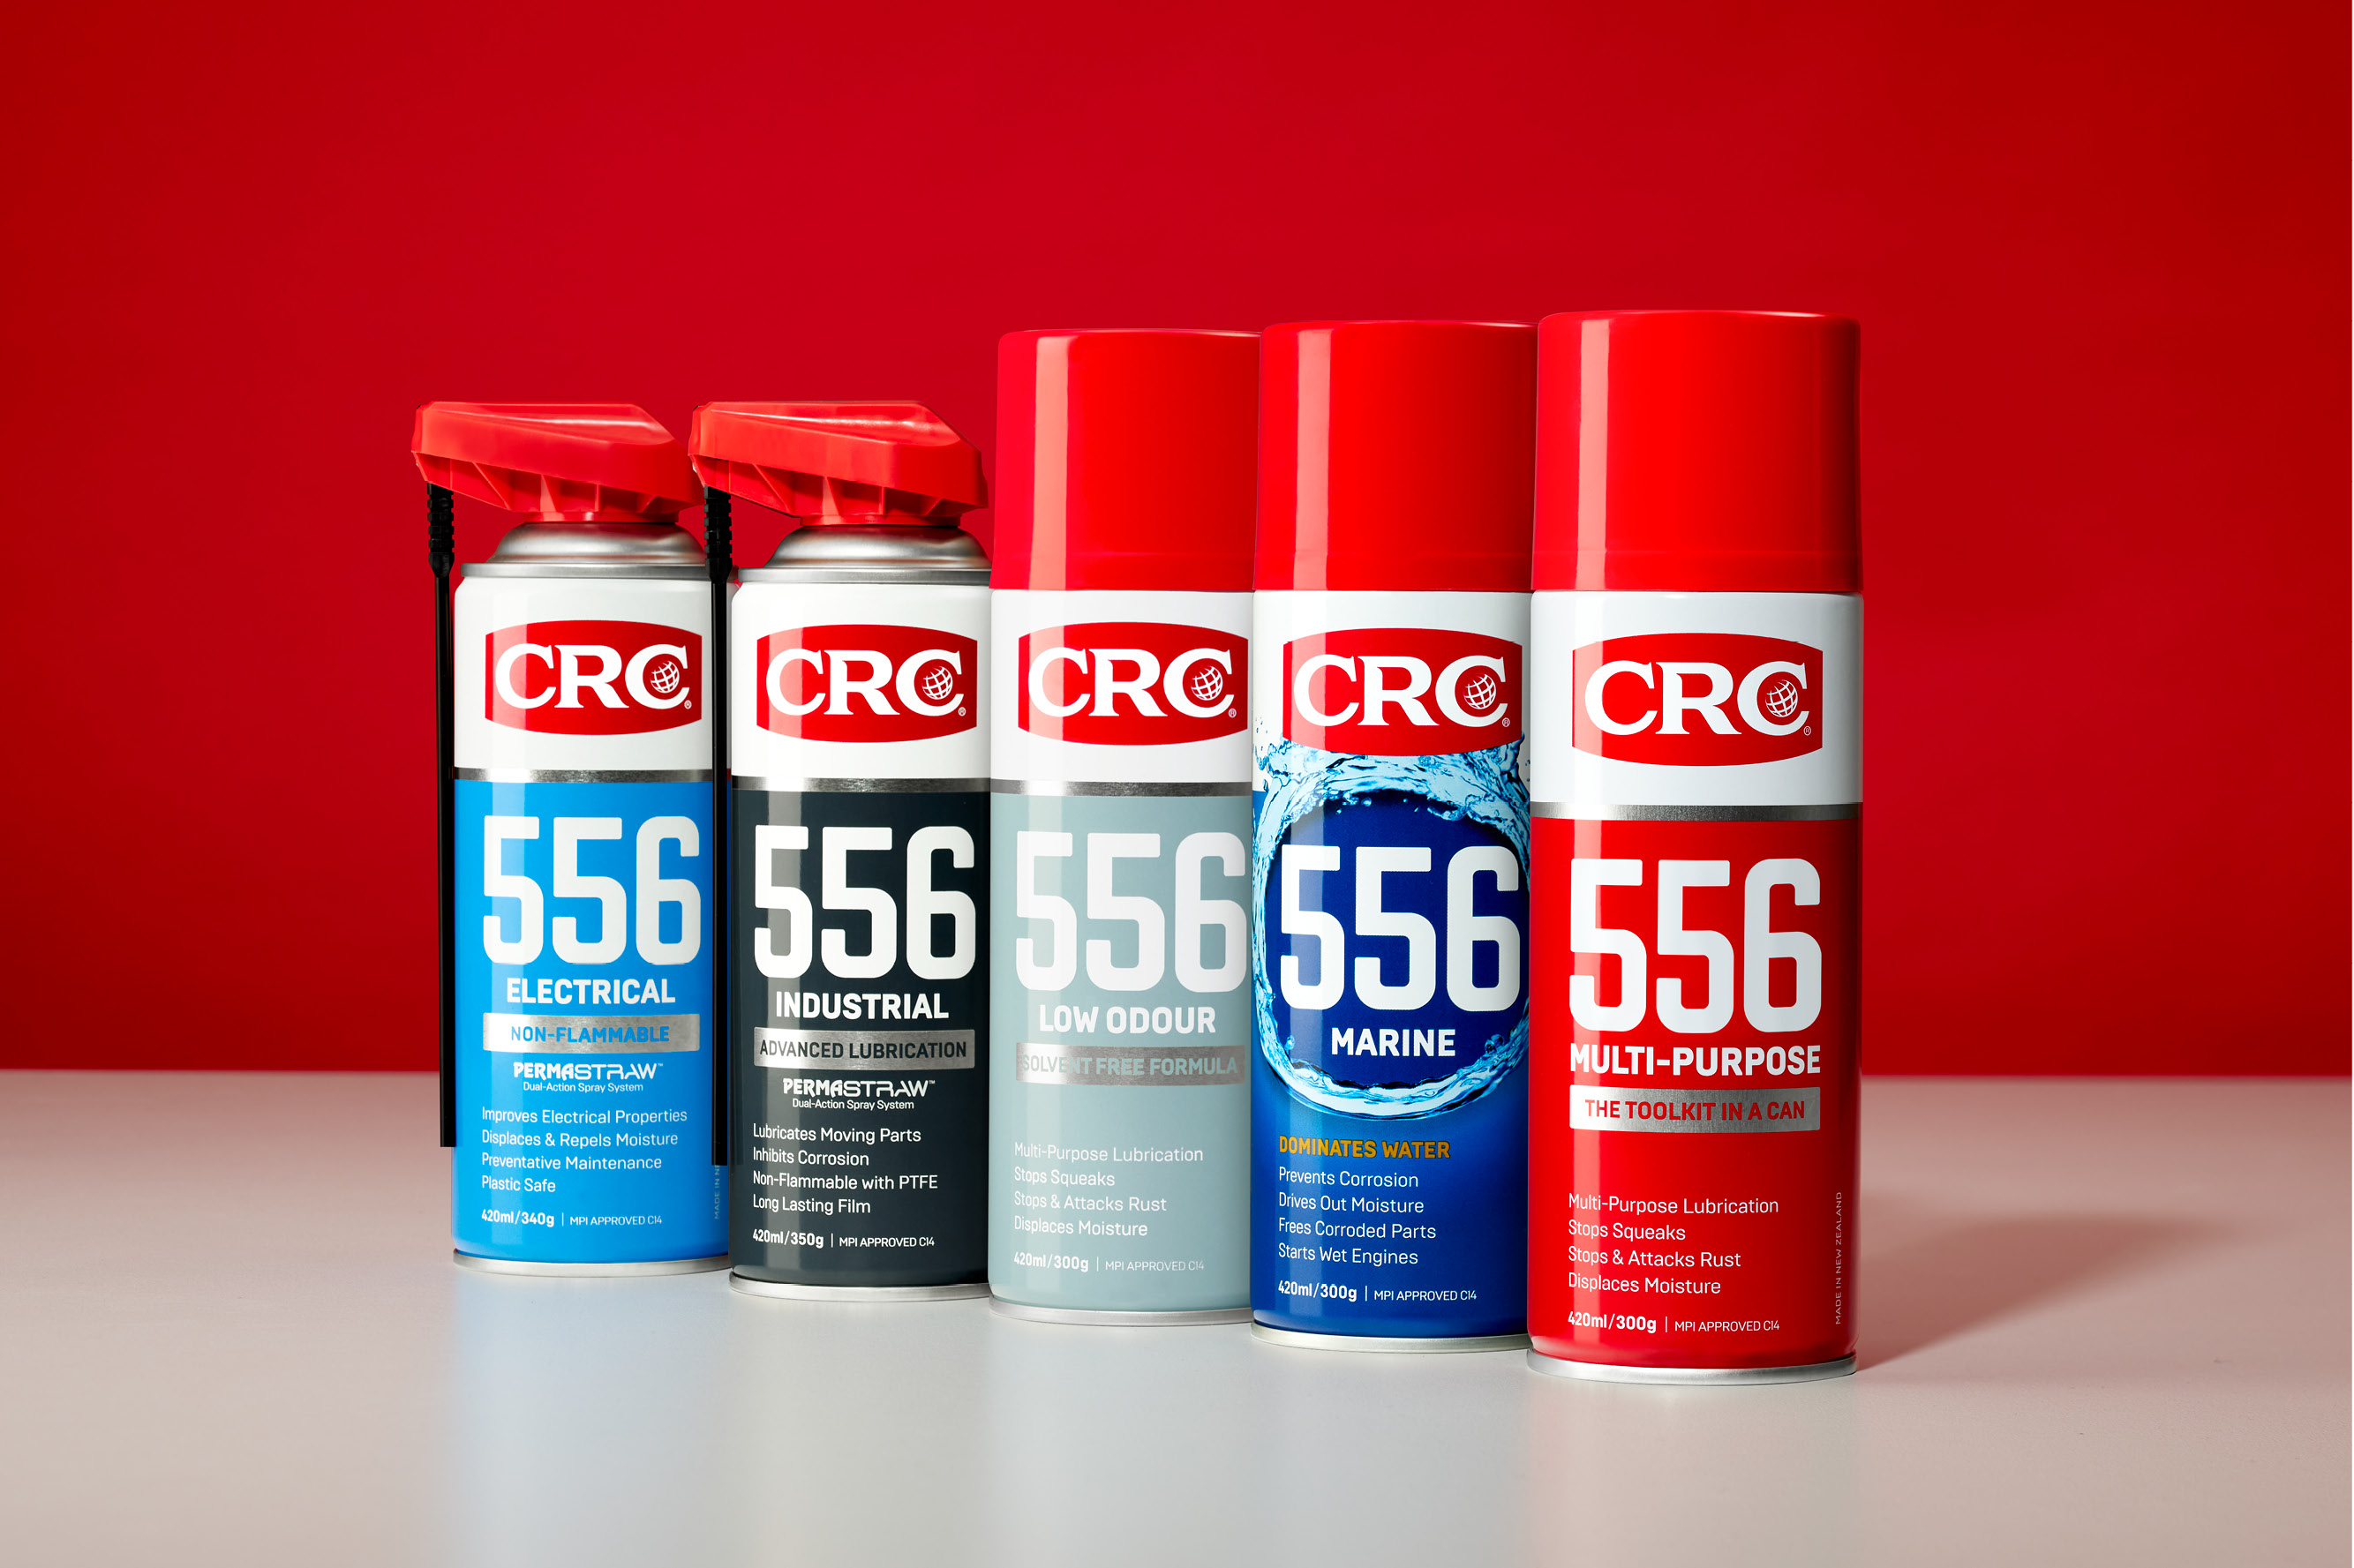 onfire design CRC 556 packaging redesign 19